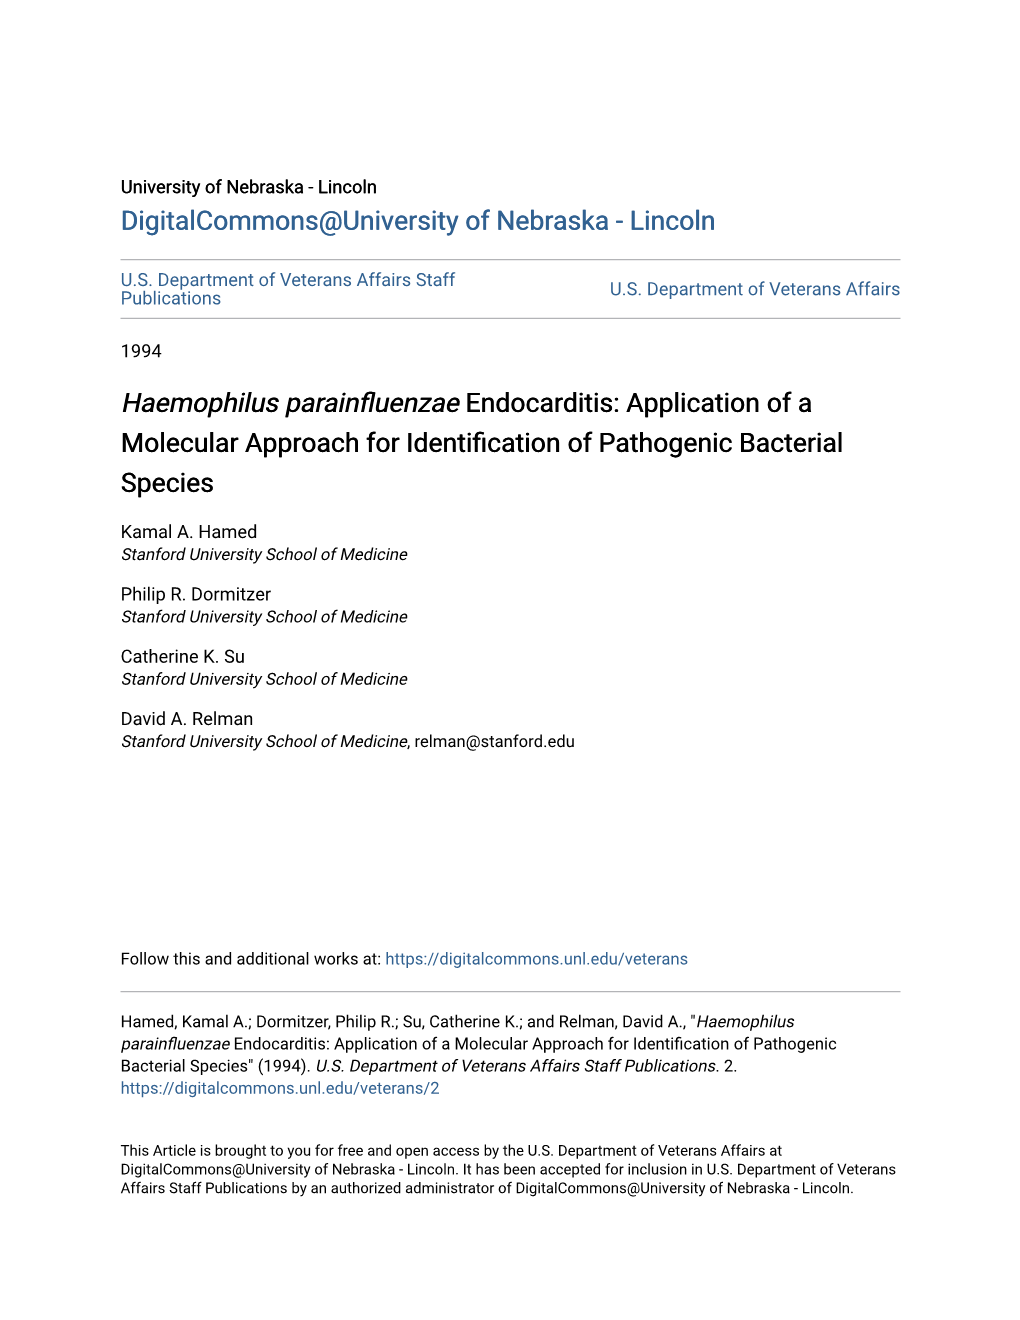 Haemophilus Parainfluenzae Endocarditis: Application of a Molecular Approach for Identification of Athogenicp Bacterial Species